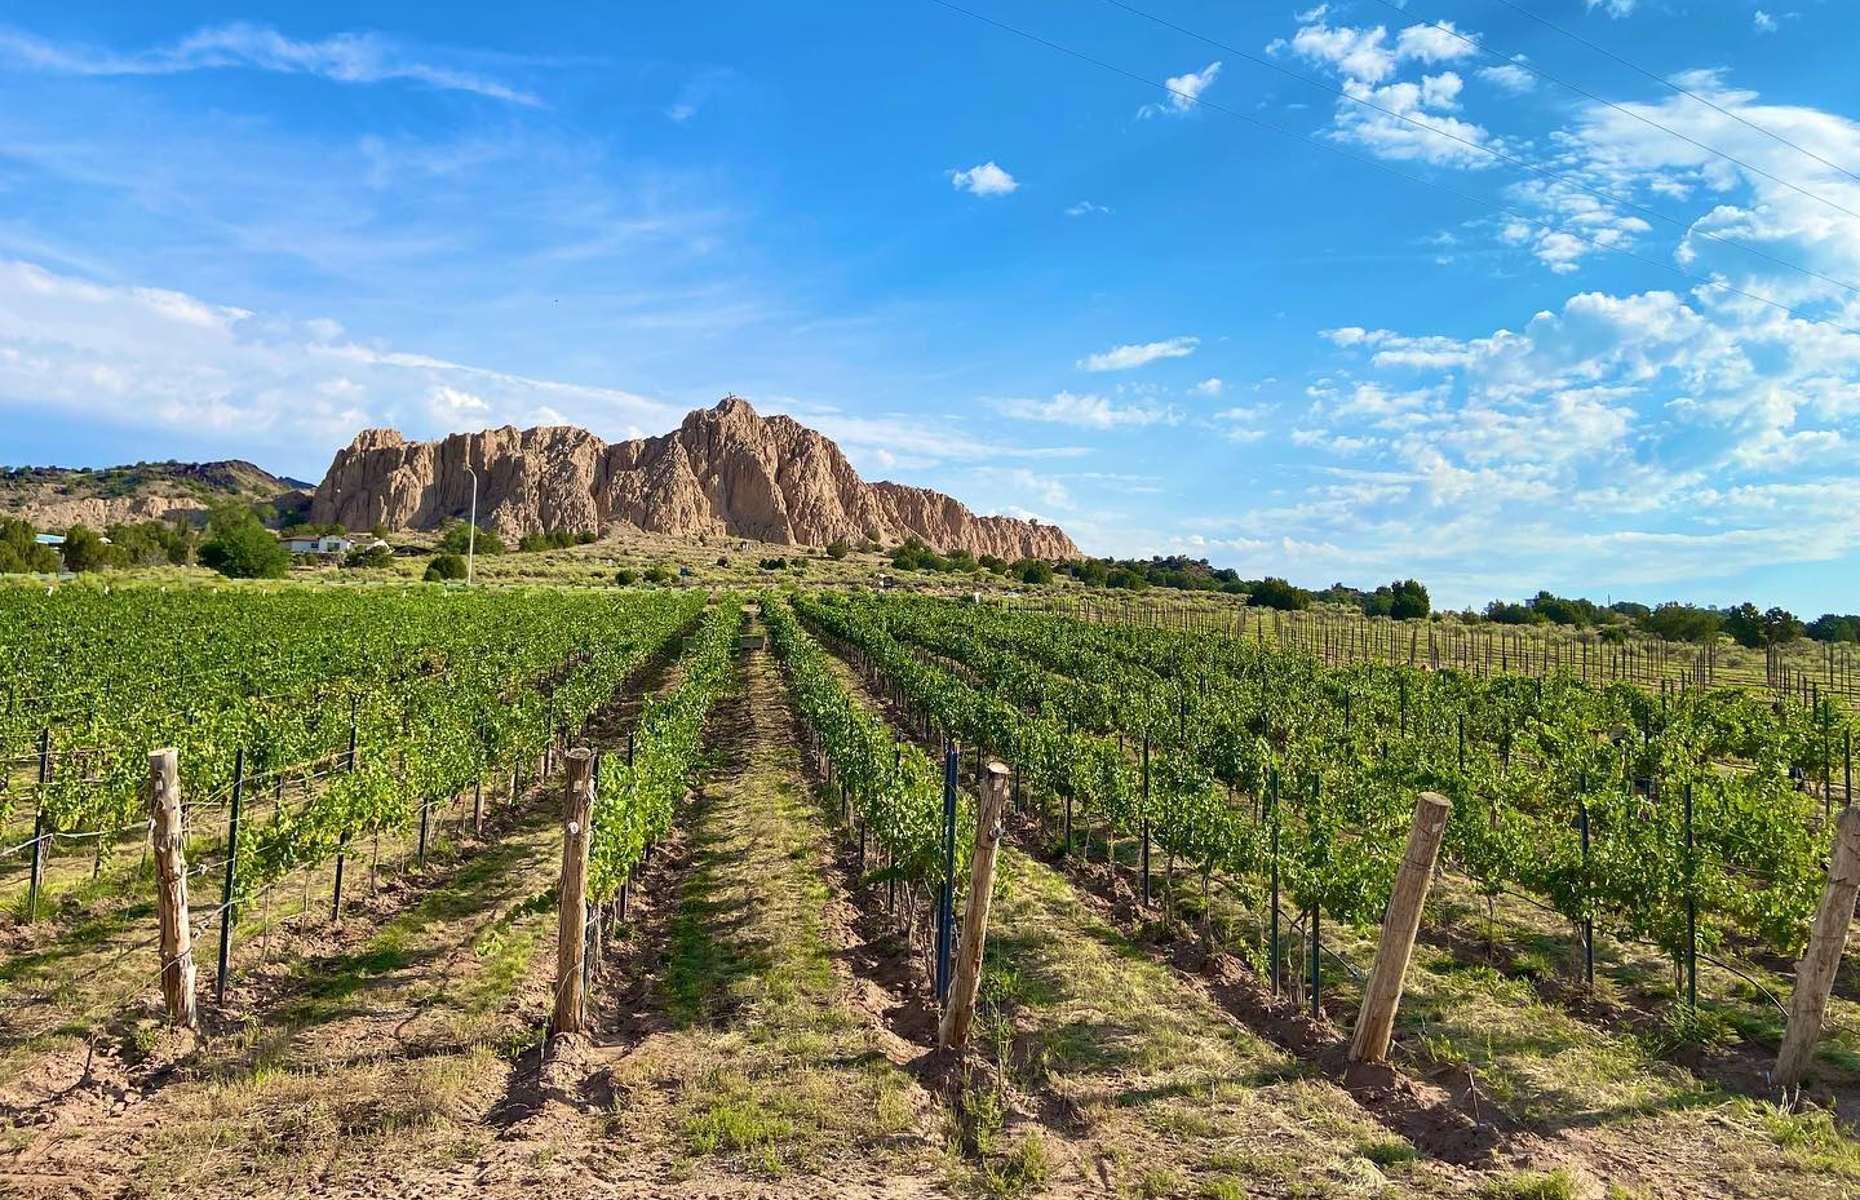 <p>New Mexico's winemaking history goes back some 400 years, to when Spanish missionaries began growing grapes near the banks of the Rio Grande. And if you’re after somewhere picturesque to taste world-class vino, head to <a href="https://vivacwinery.com/">Vivác Winery</a> in Dixon. At 6,000 feet (1,829m) in elevation, it’s one of the highest-altitude wineries on the planet, which also means the views from its tasting room are world-class. Prices are reasonable too, with a standard tasting flight featuring four wines coming in at just $12 a head. </p>